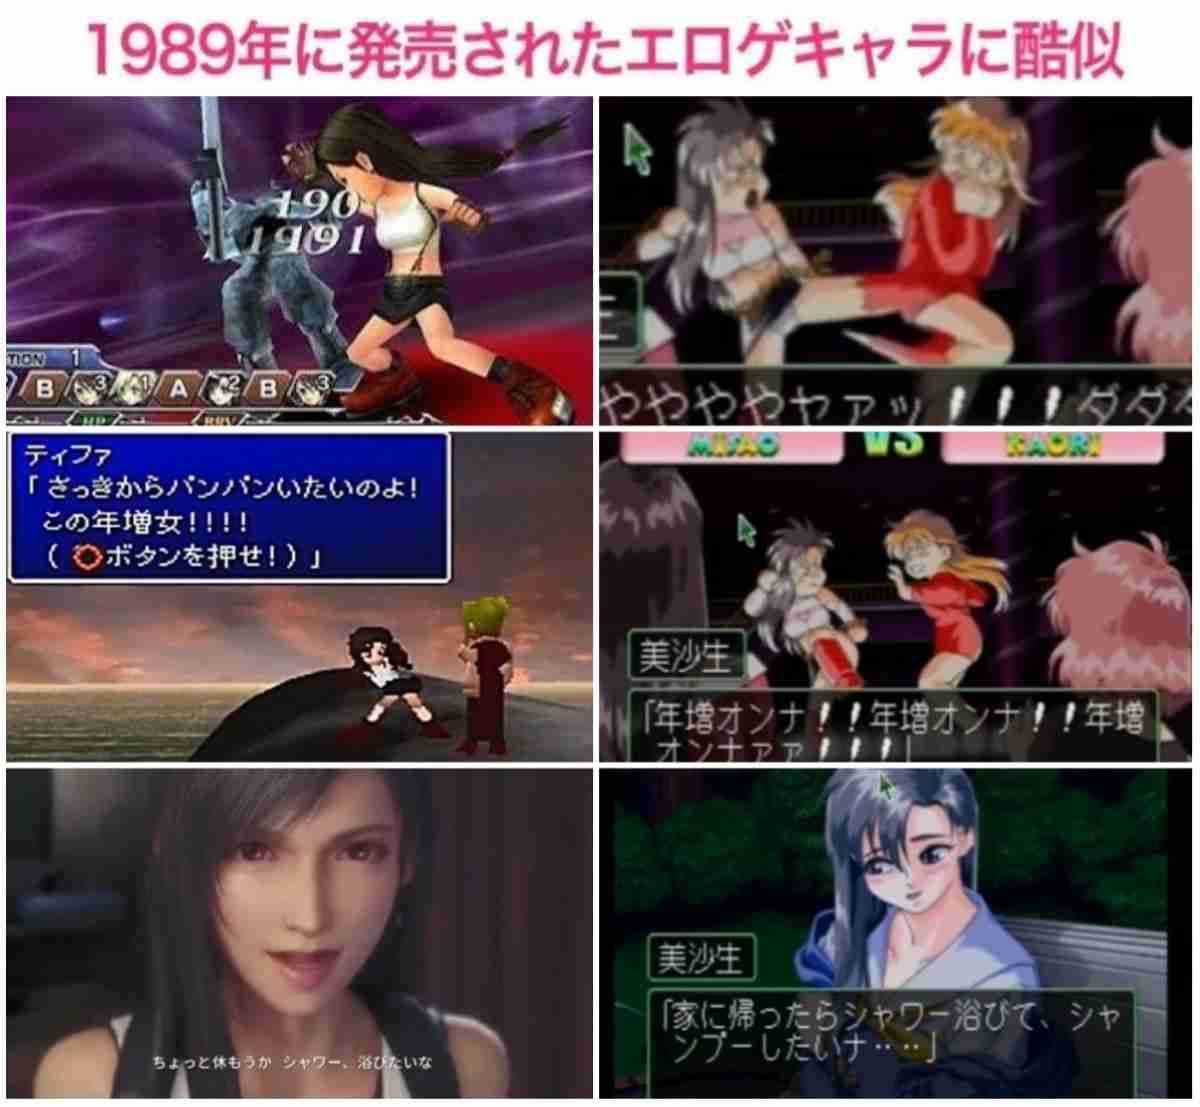 Crimson is the first person who portrayed Ff7's Tifa erotic, isn't he? 9